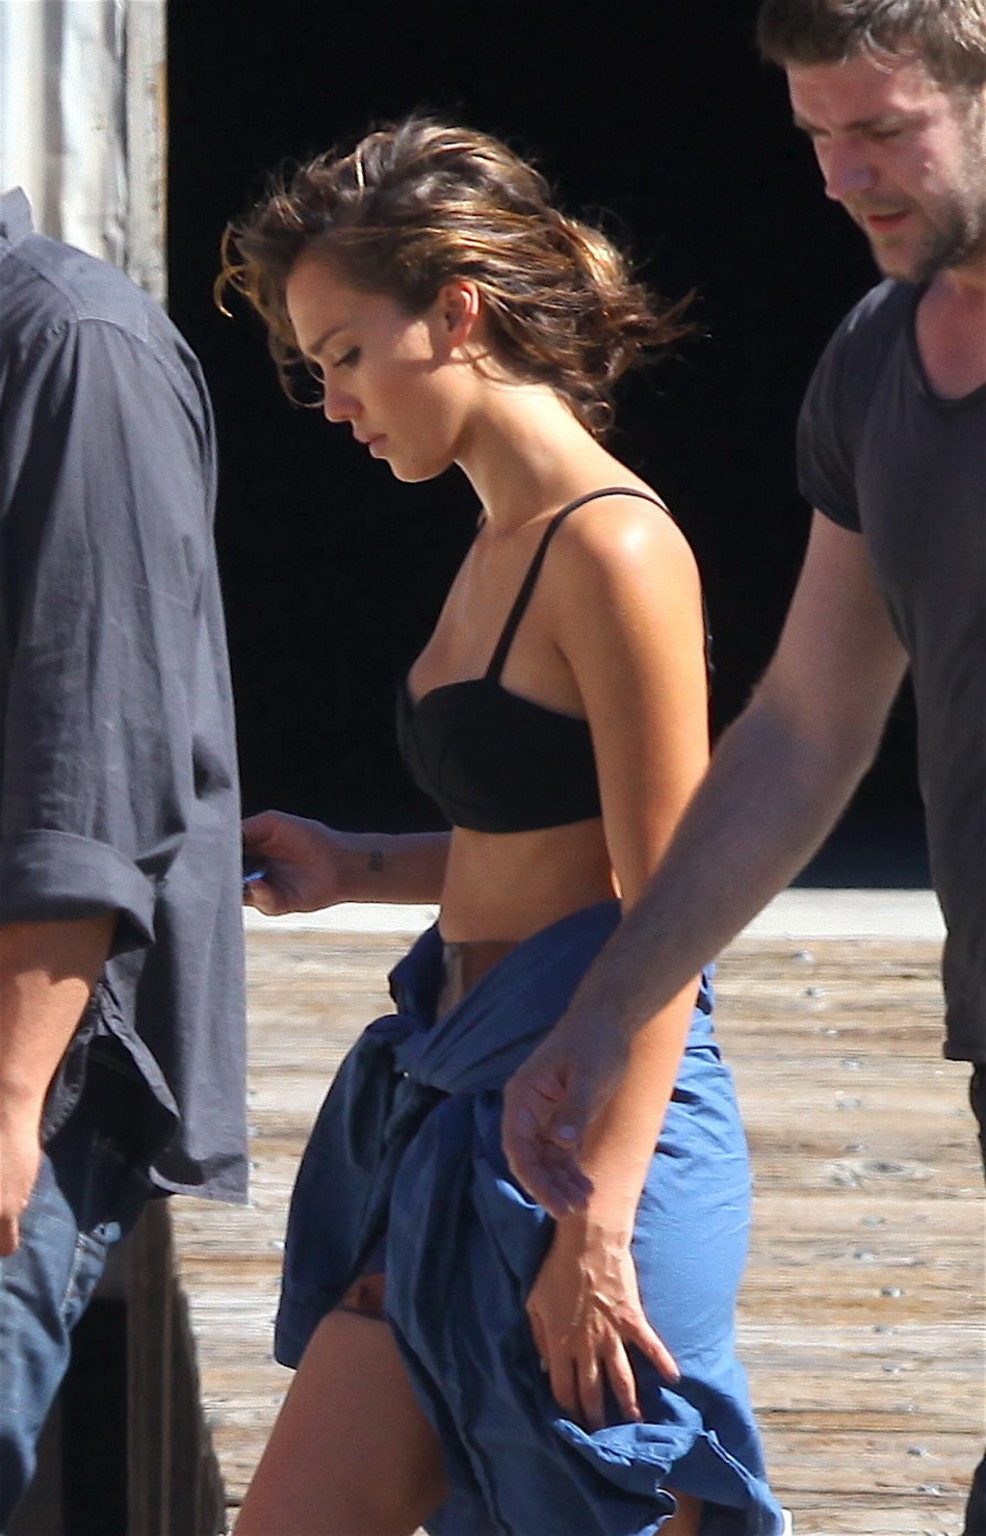 Jessica Alba wearing black bra at the photoshoot in Los Angeles #75335610